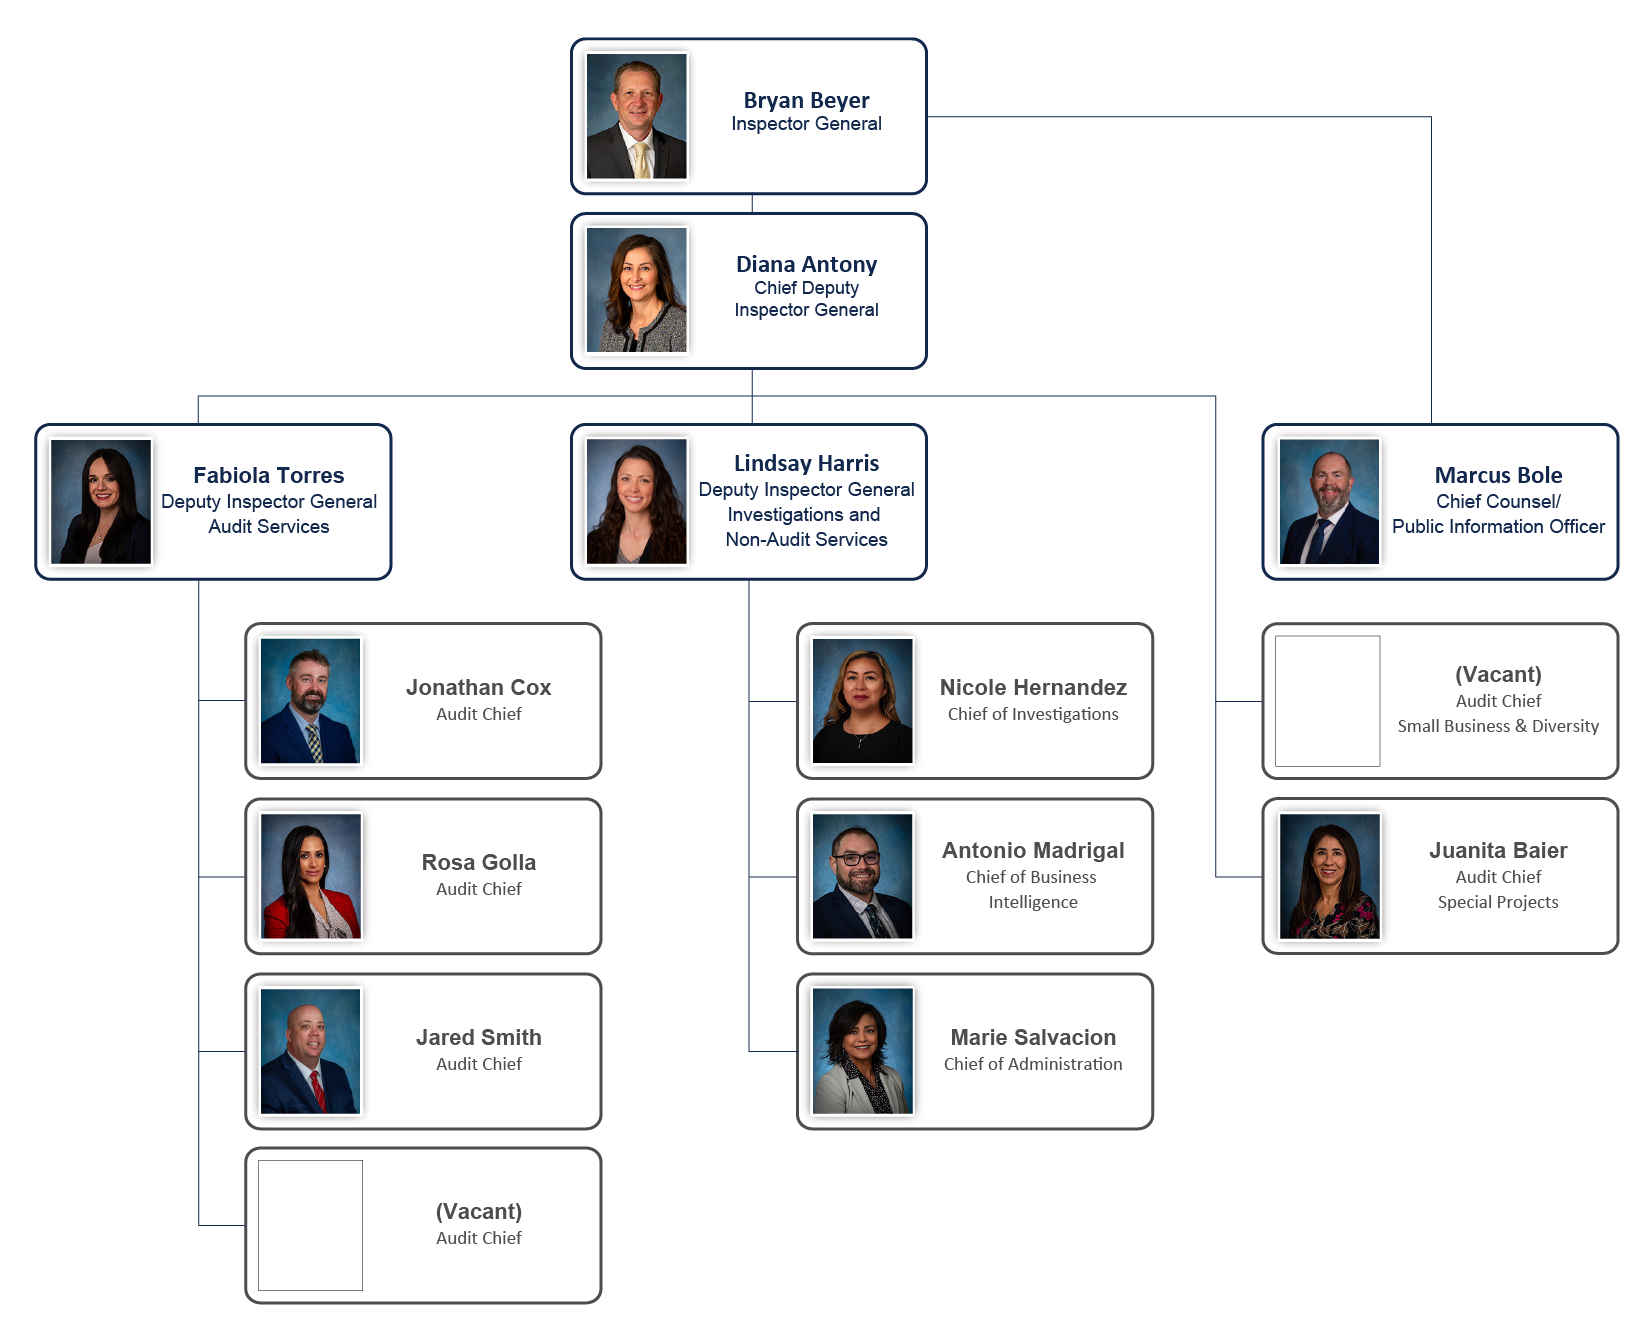 This is the Organization Chart for the IOAI. Diana Antony, Acting Inspector General. Frances Parmelee, Action Chief Deputy Inspector General. Audit Chiefs. Finance and Operations, Juanita Baier. Project Delivery, David Wang (Acting). Planning and Modal, Fabiola Torres. Investigations, Nicole Hernandez (Acting). Administration, Marie Salvacion, 